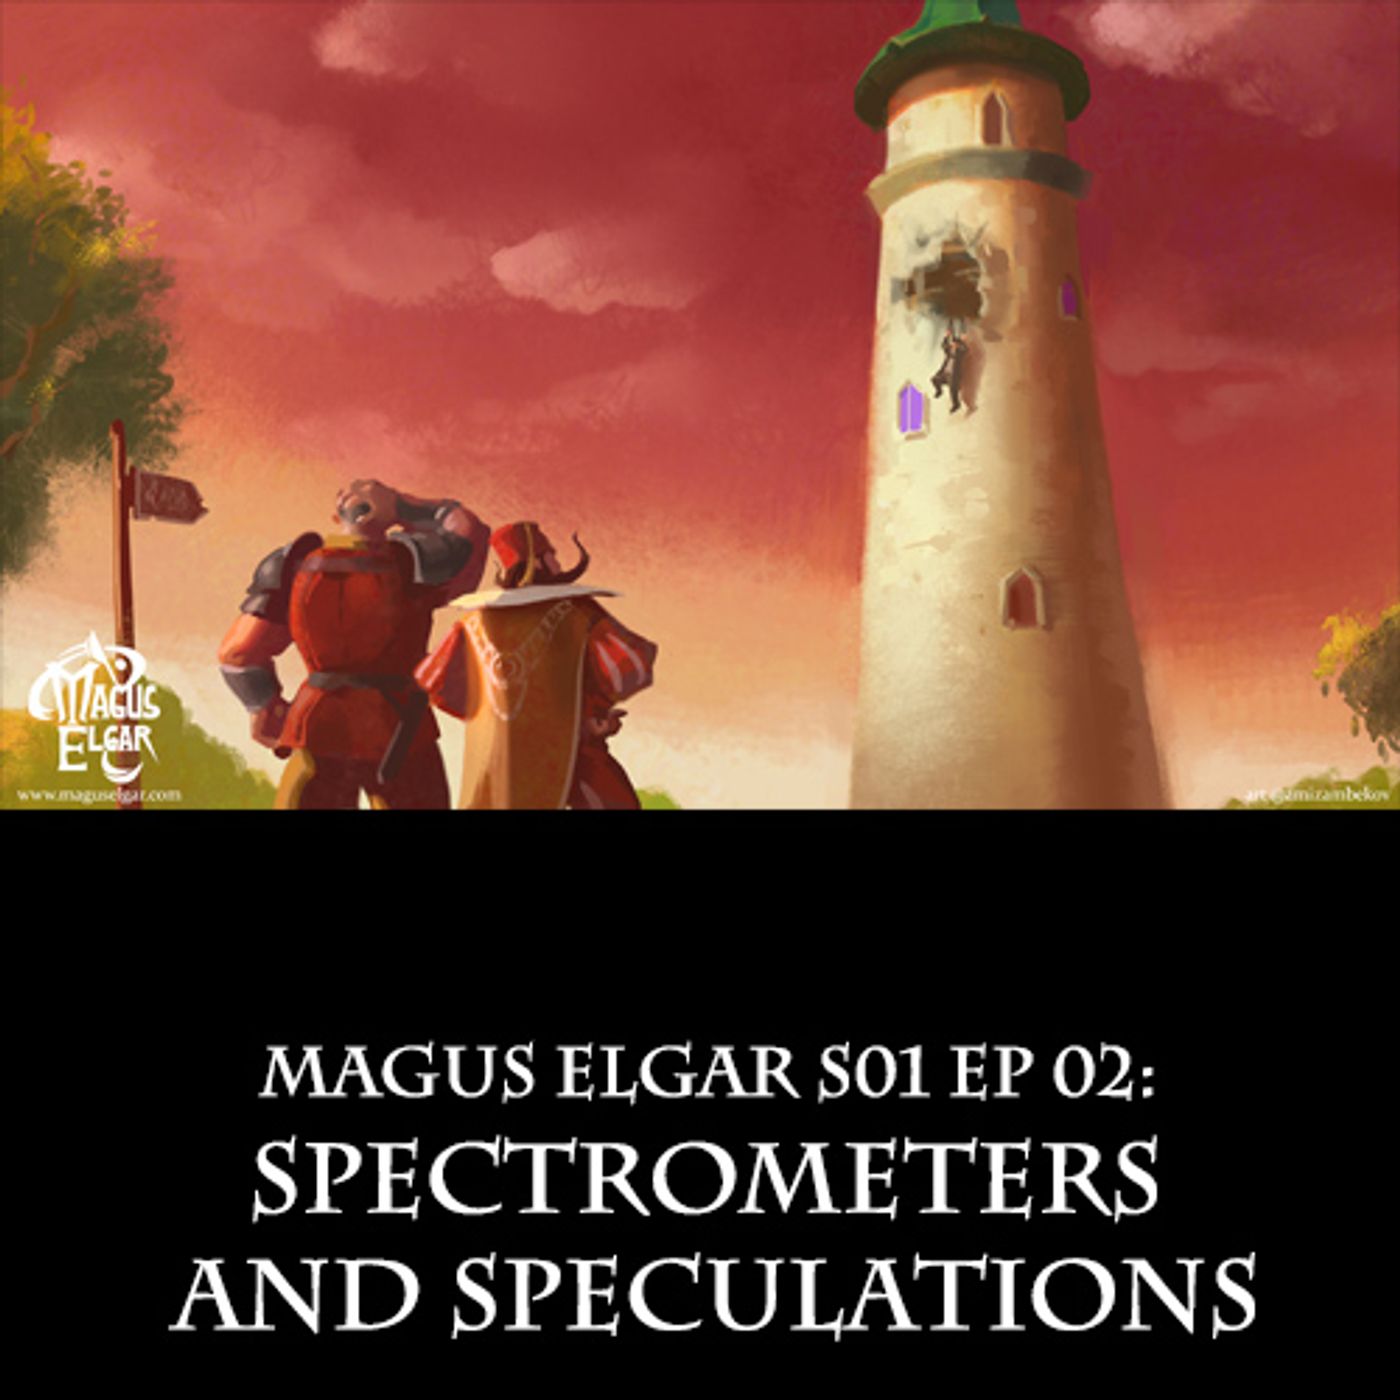 Magus Elgar S01 Ep 02: Spectrometers and Speculations